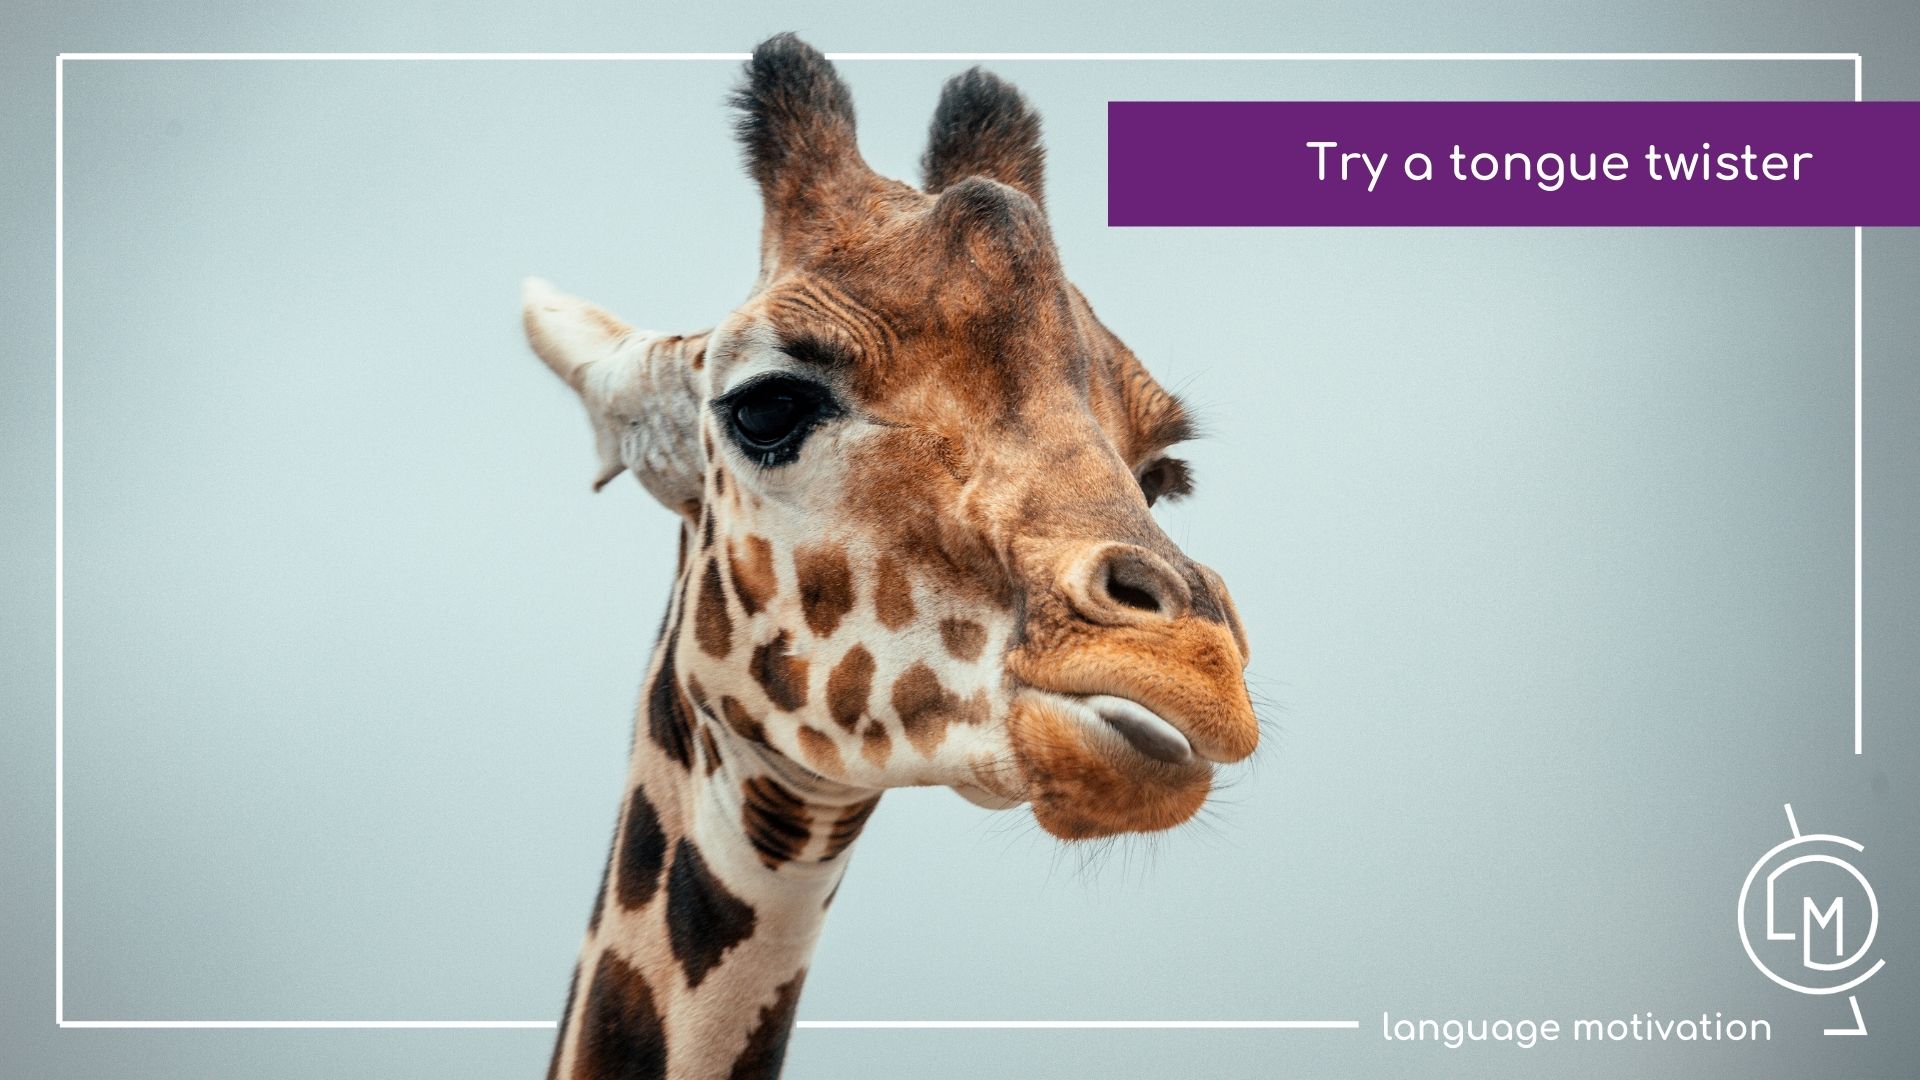 Are you in a bad mood? Try a Spanish tongue twister!